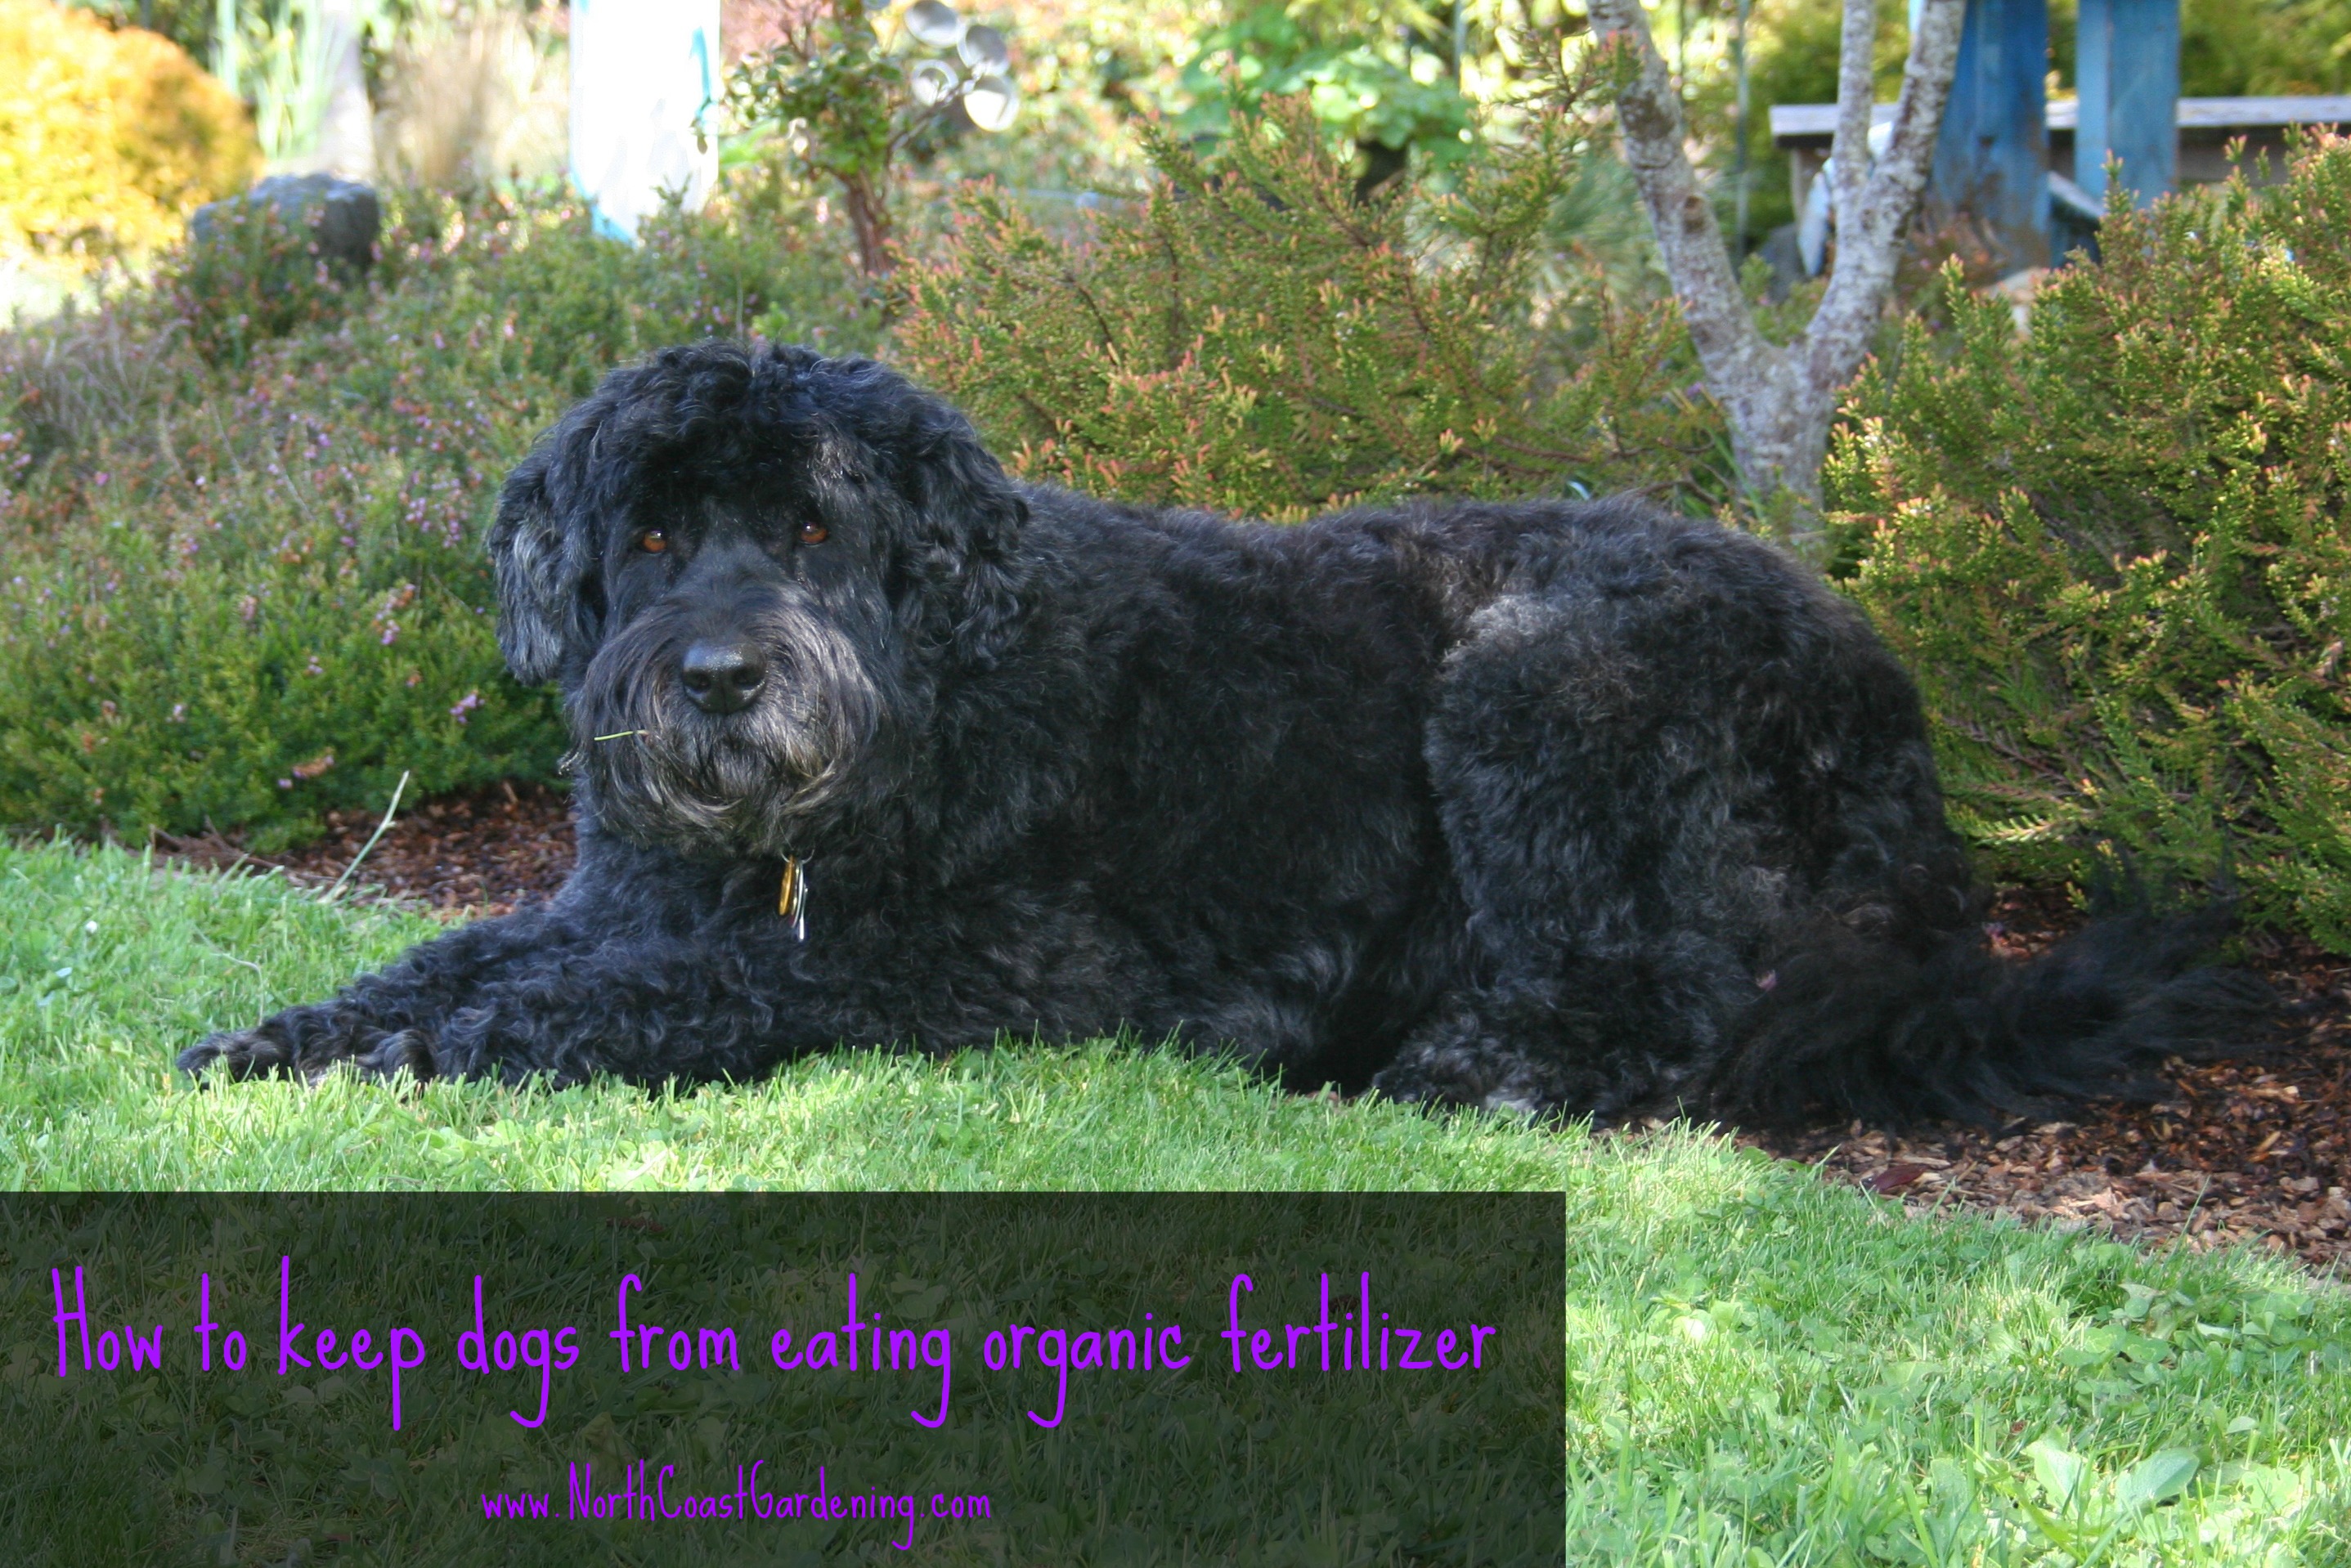 Keeping Dogs From Eating Organic Fertilizer